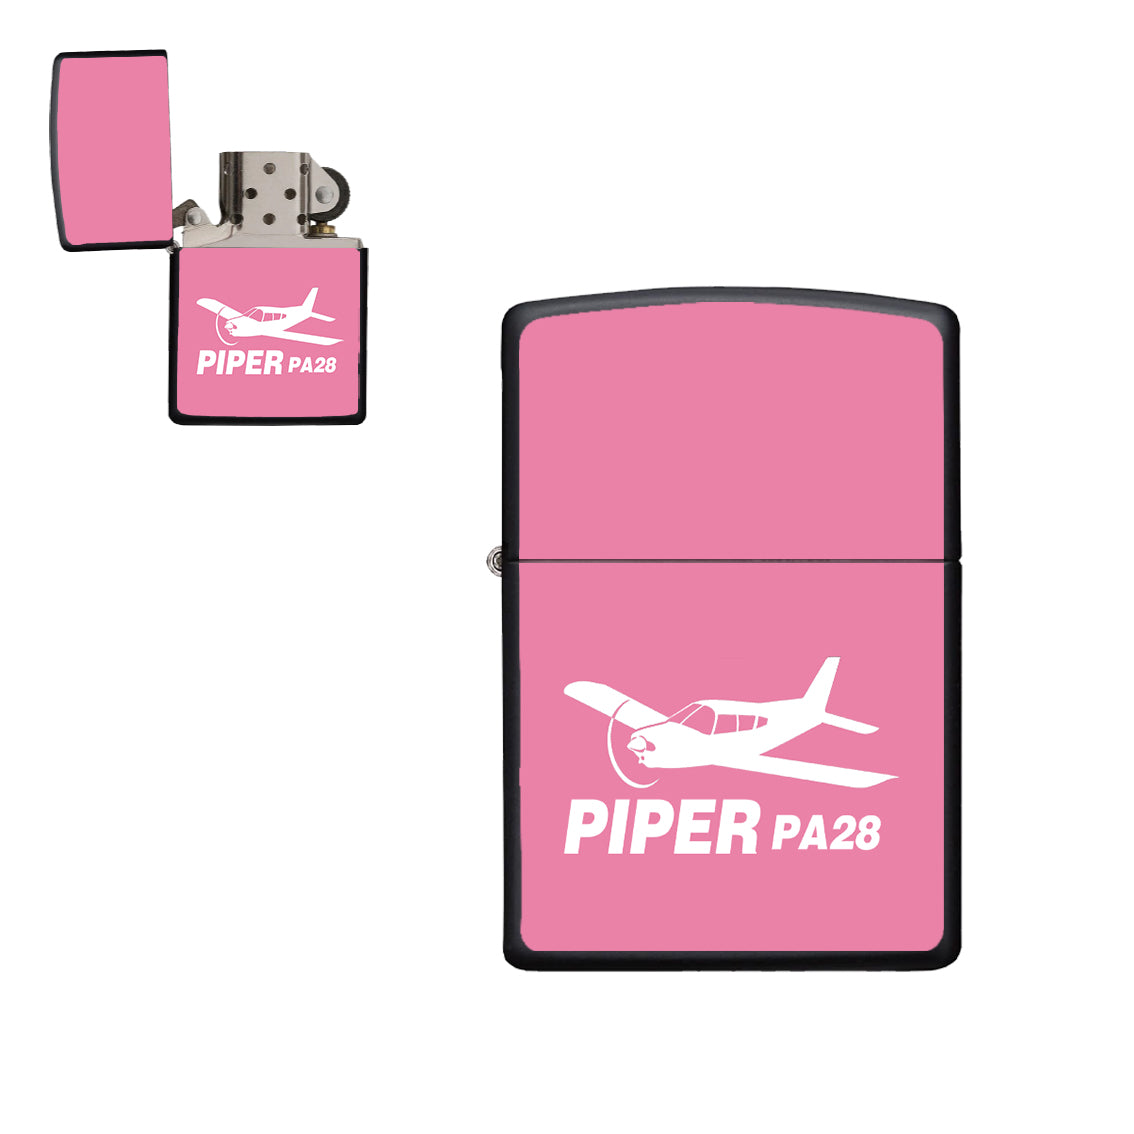 The Piper PA28 Designed Metal Lighters